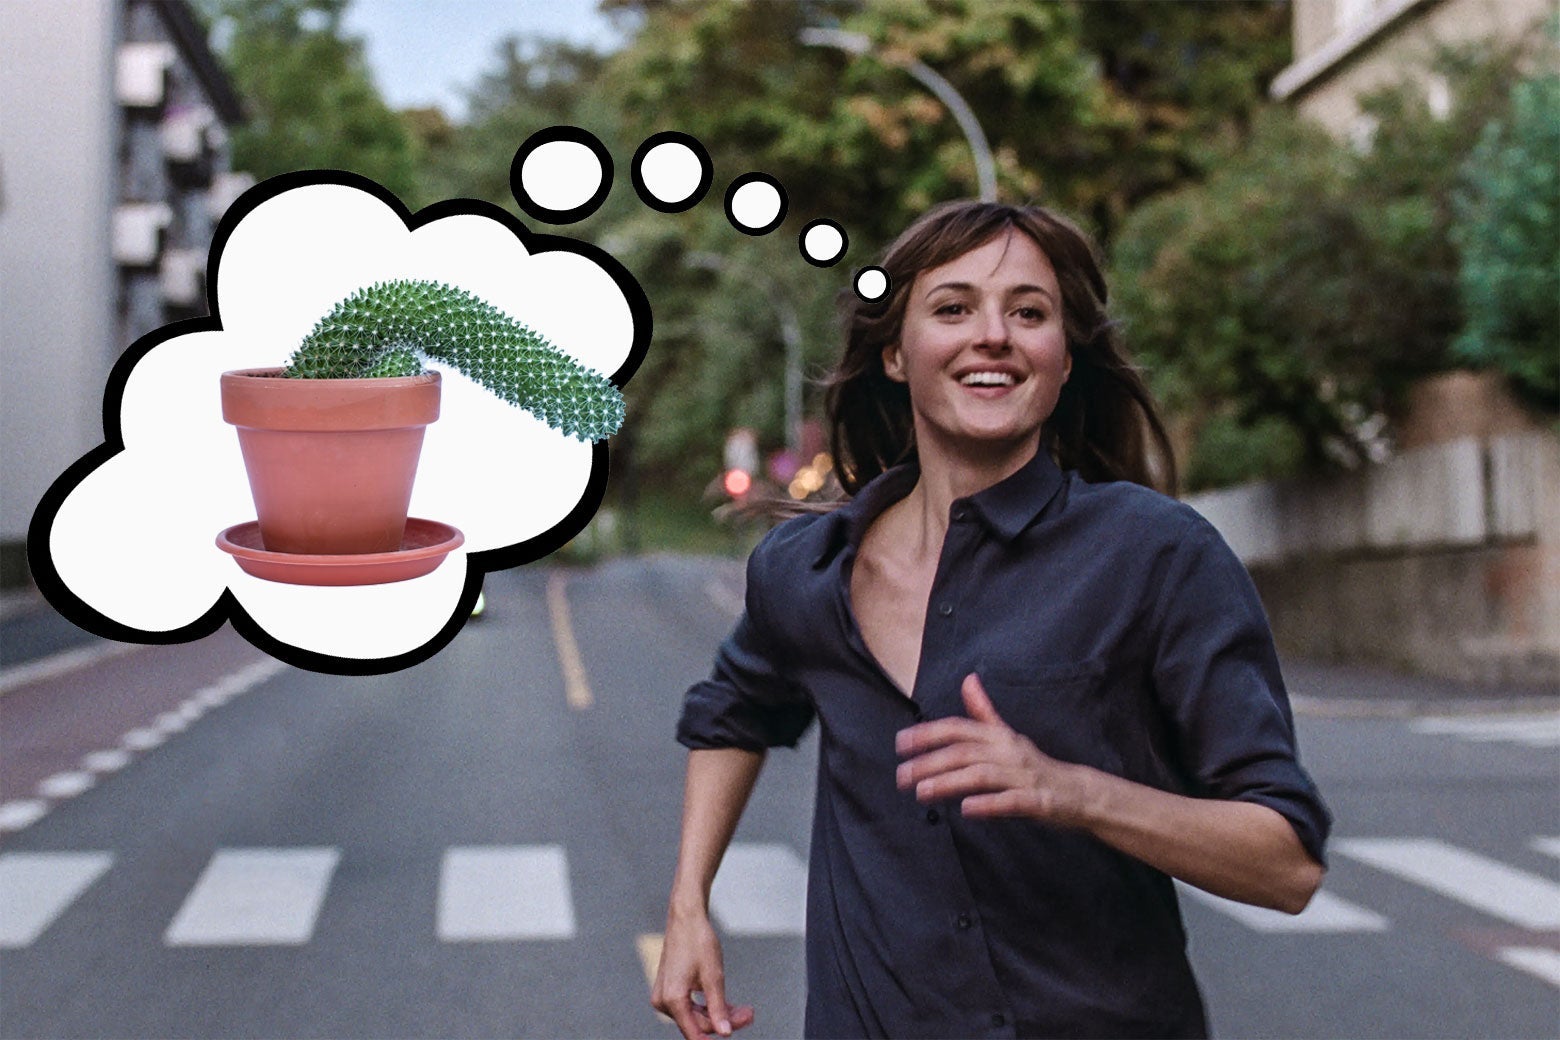 The Julie character from the film runs down the street with a thought bubble of a phallic plant that has fallen over limp.